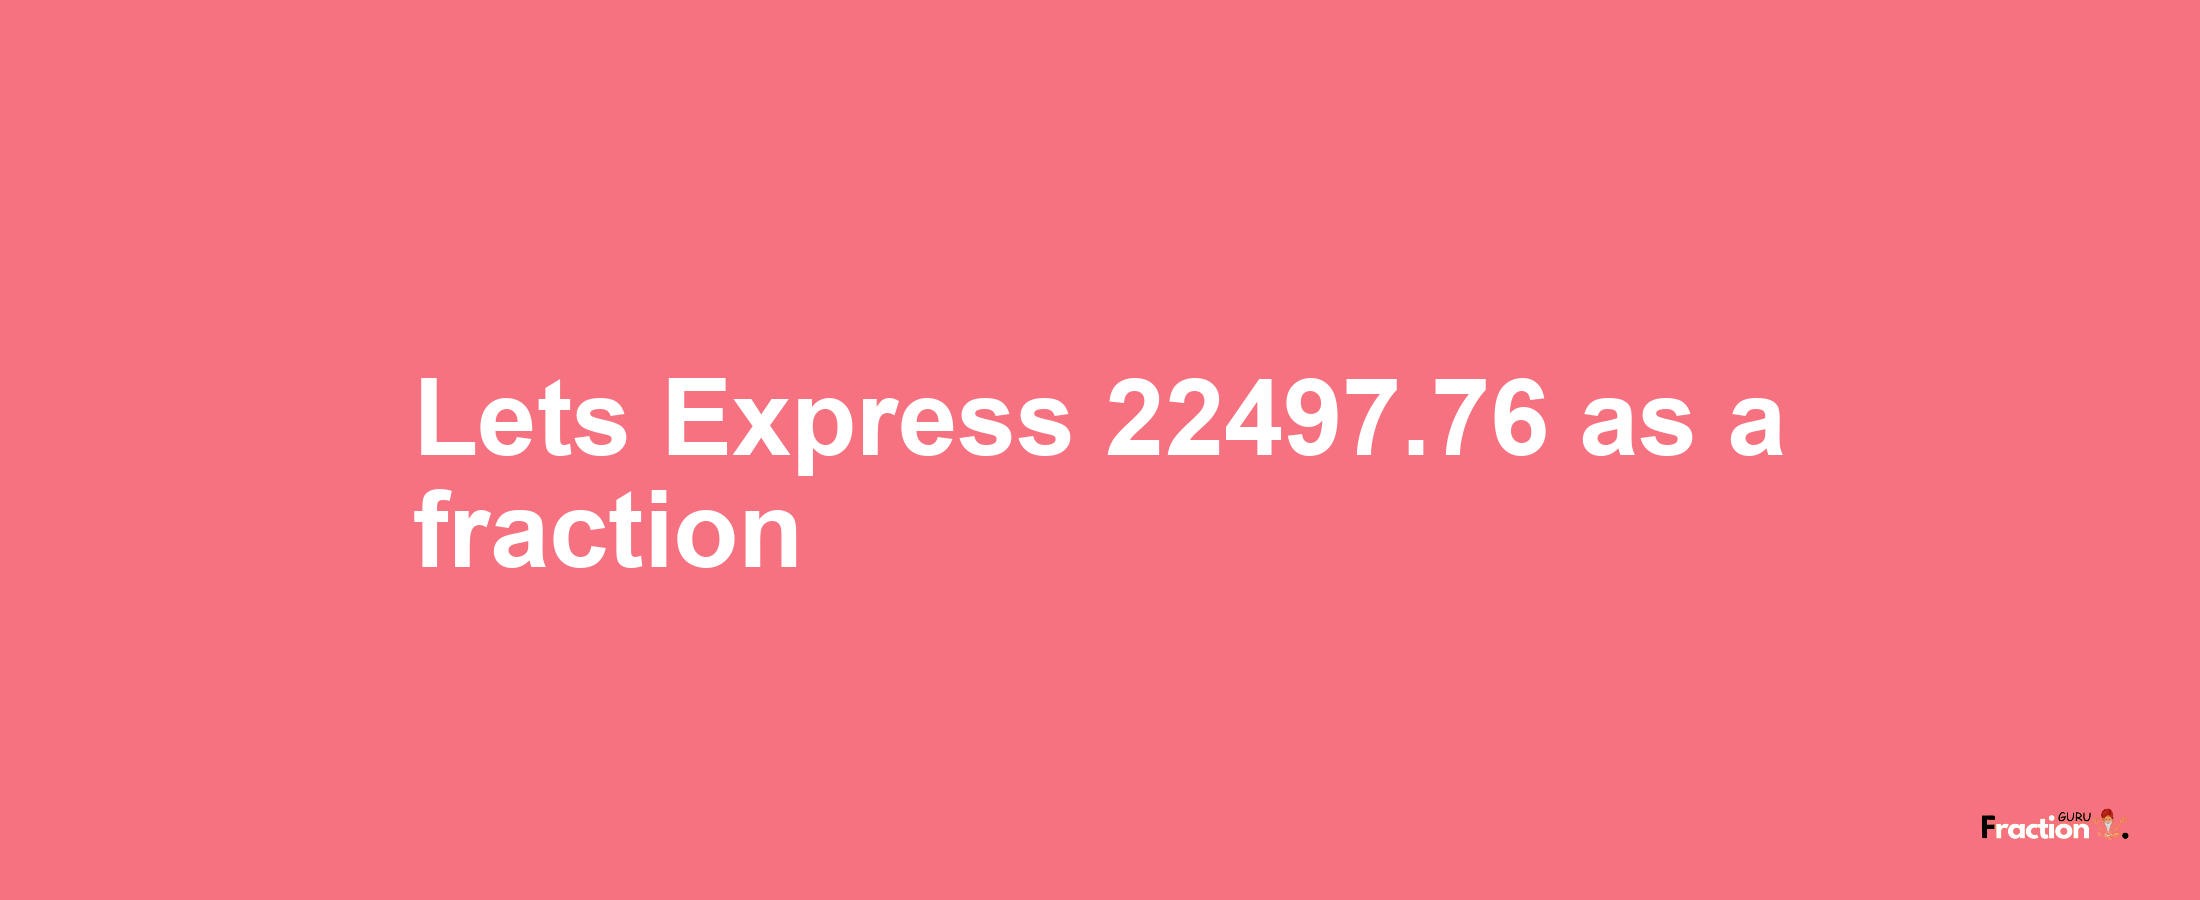 Lets Express 22497.76 as afraction